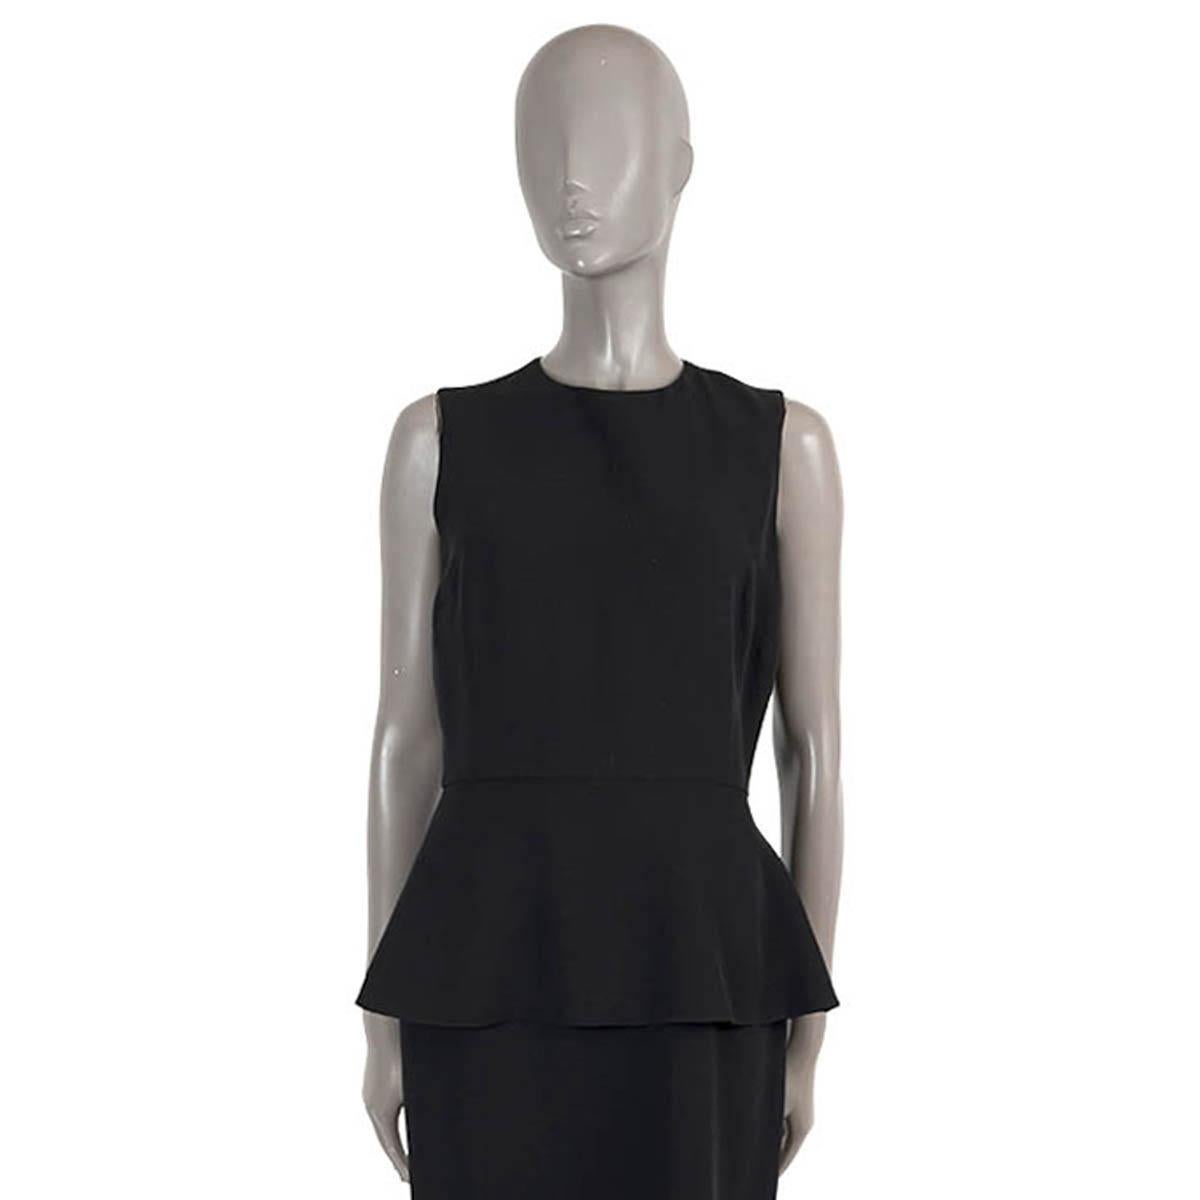 100% authentic Christian Dior sleeveless sheath dress in black silk (64%) and wool (36%). Features a crewneck and peplum. Opens with a concealed zipper and buttons in the back and is lined in silk (100%). Has been worn and is in excellent